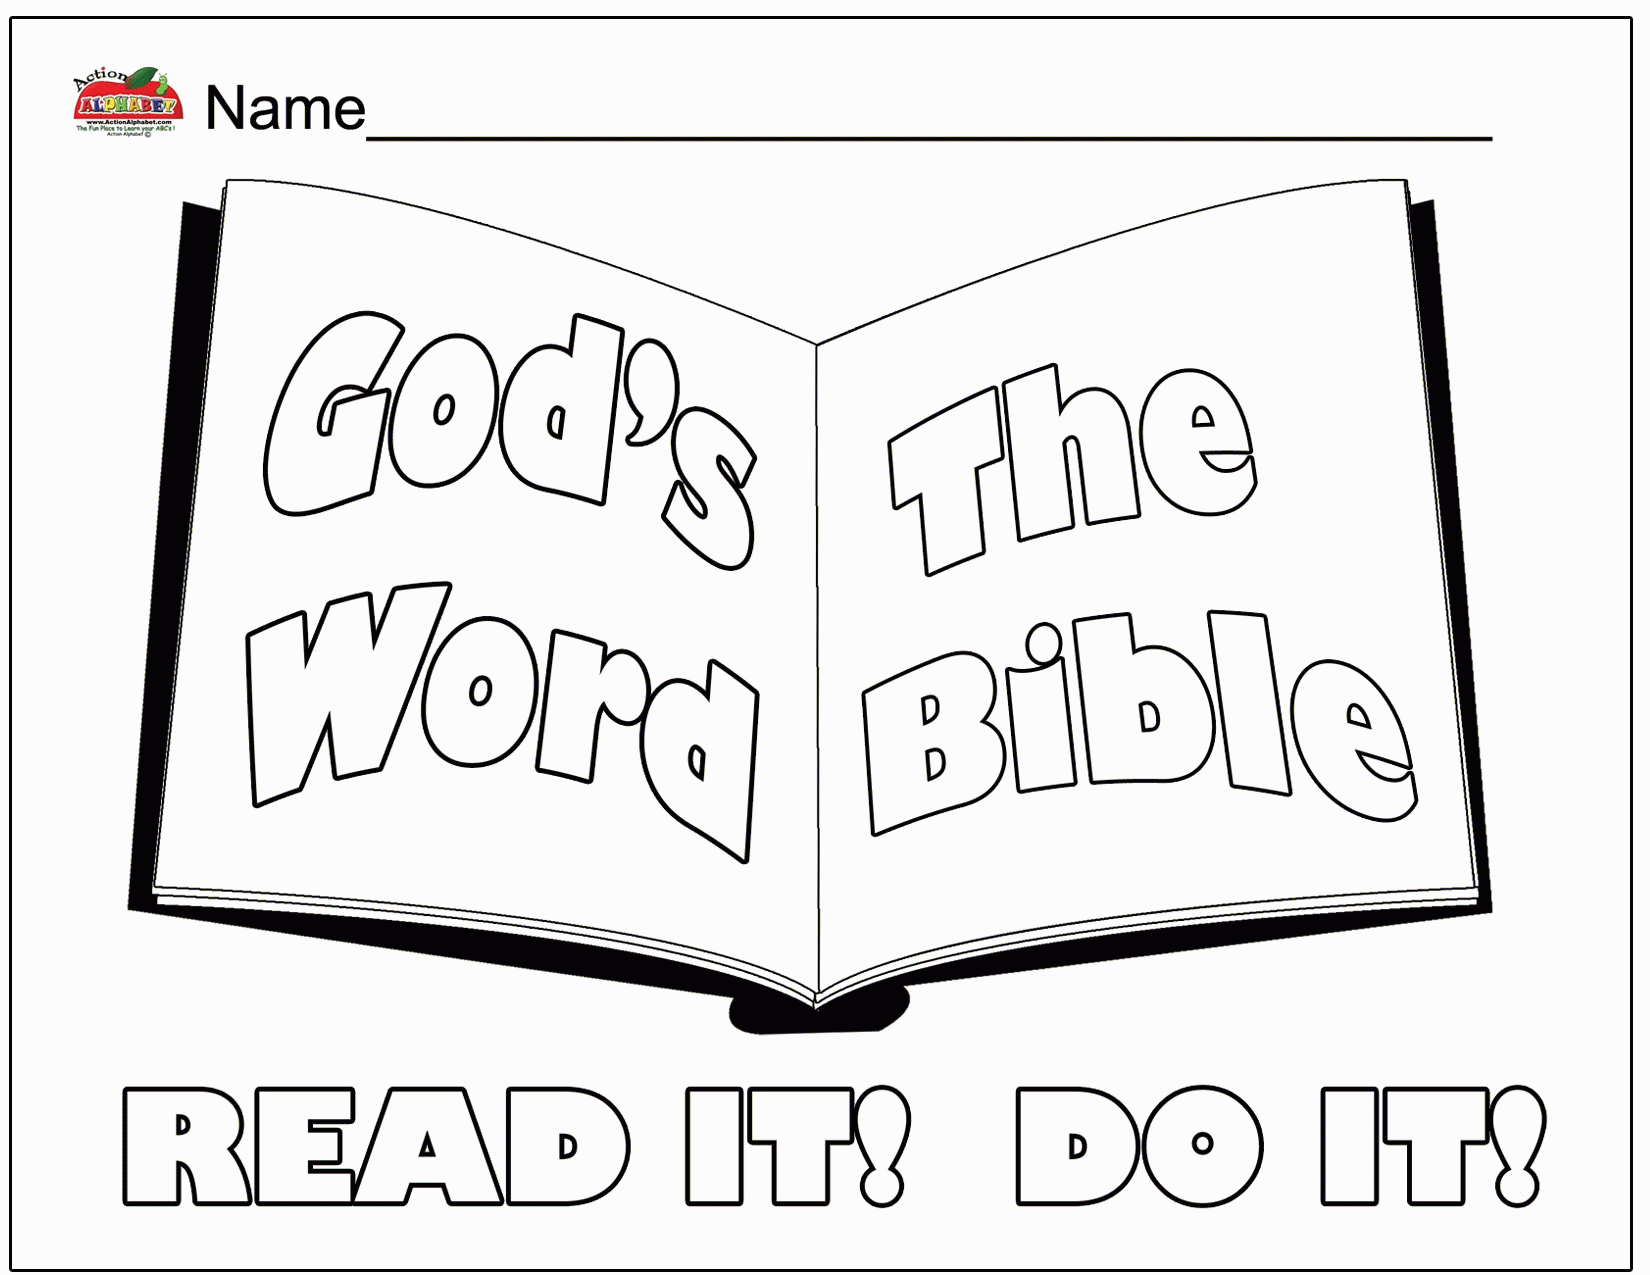 coloring-page-free-printable-bible-verse-coloring-page-coloring-home